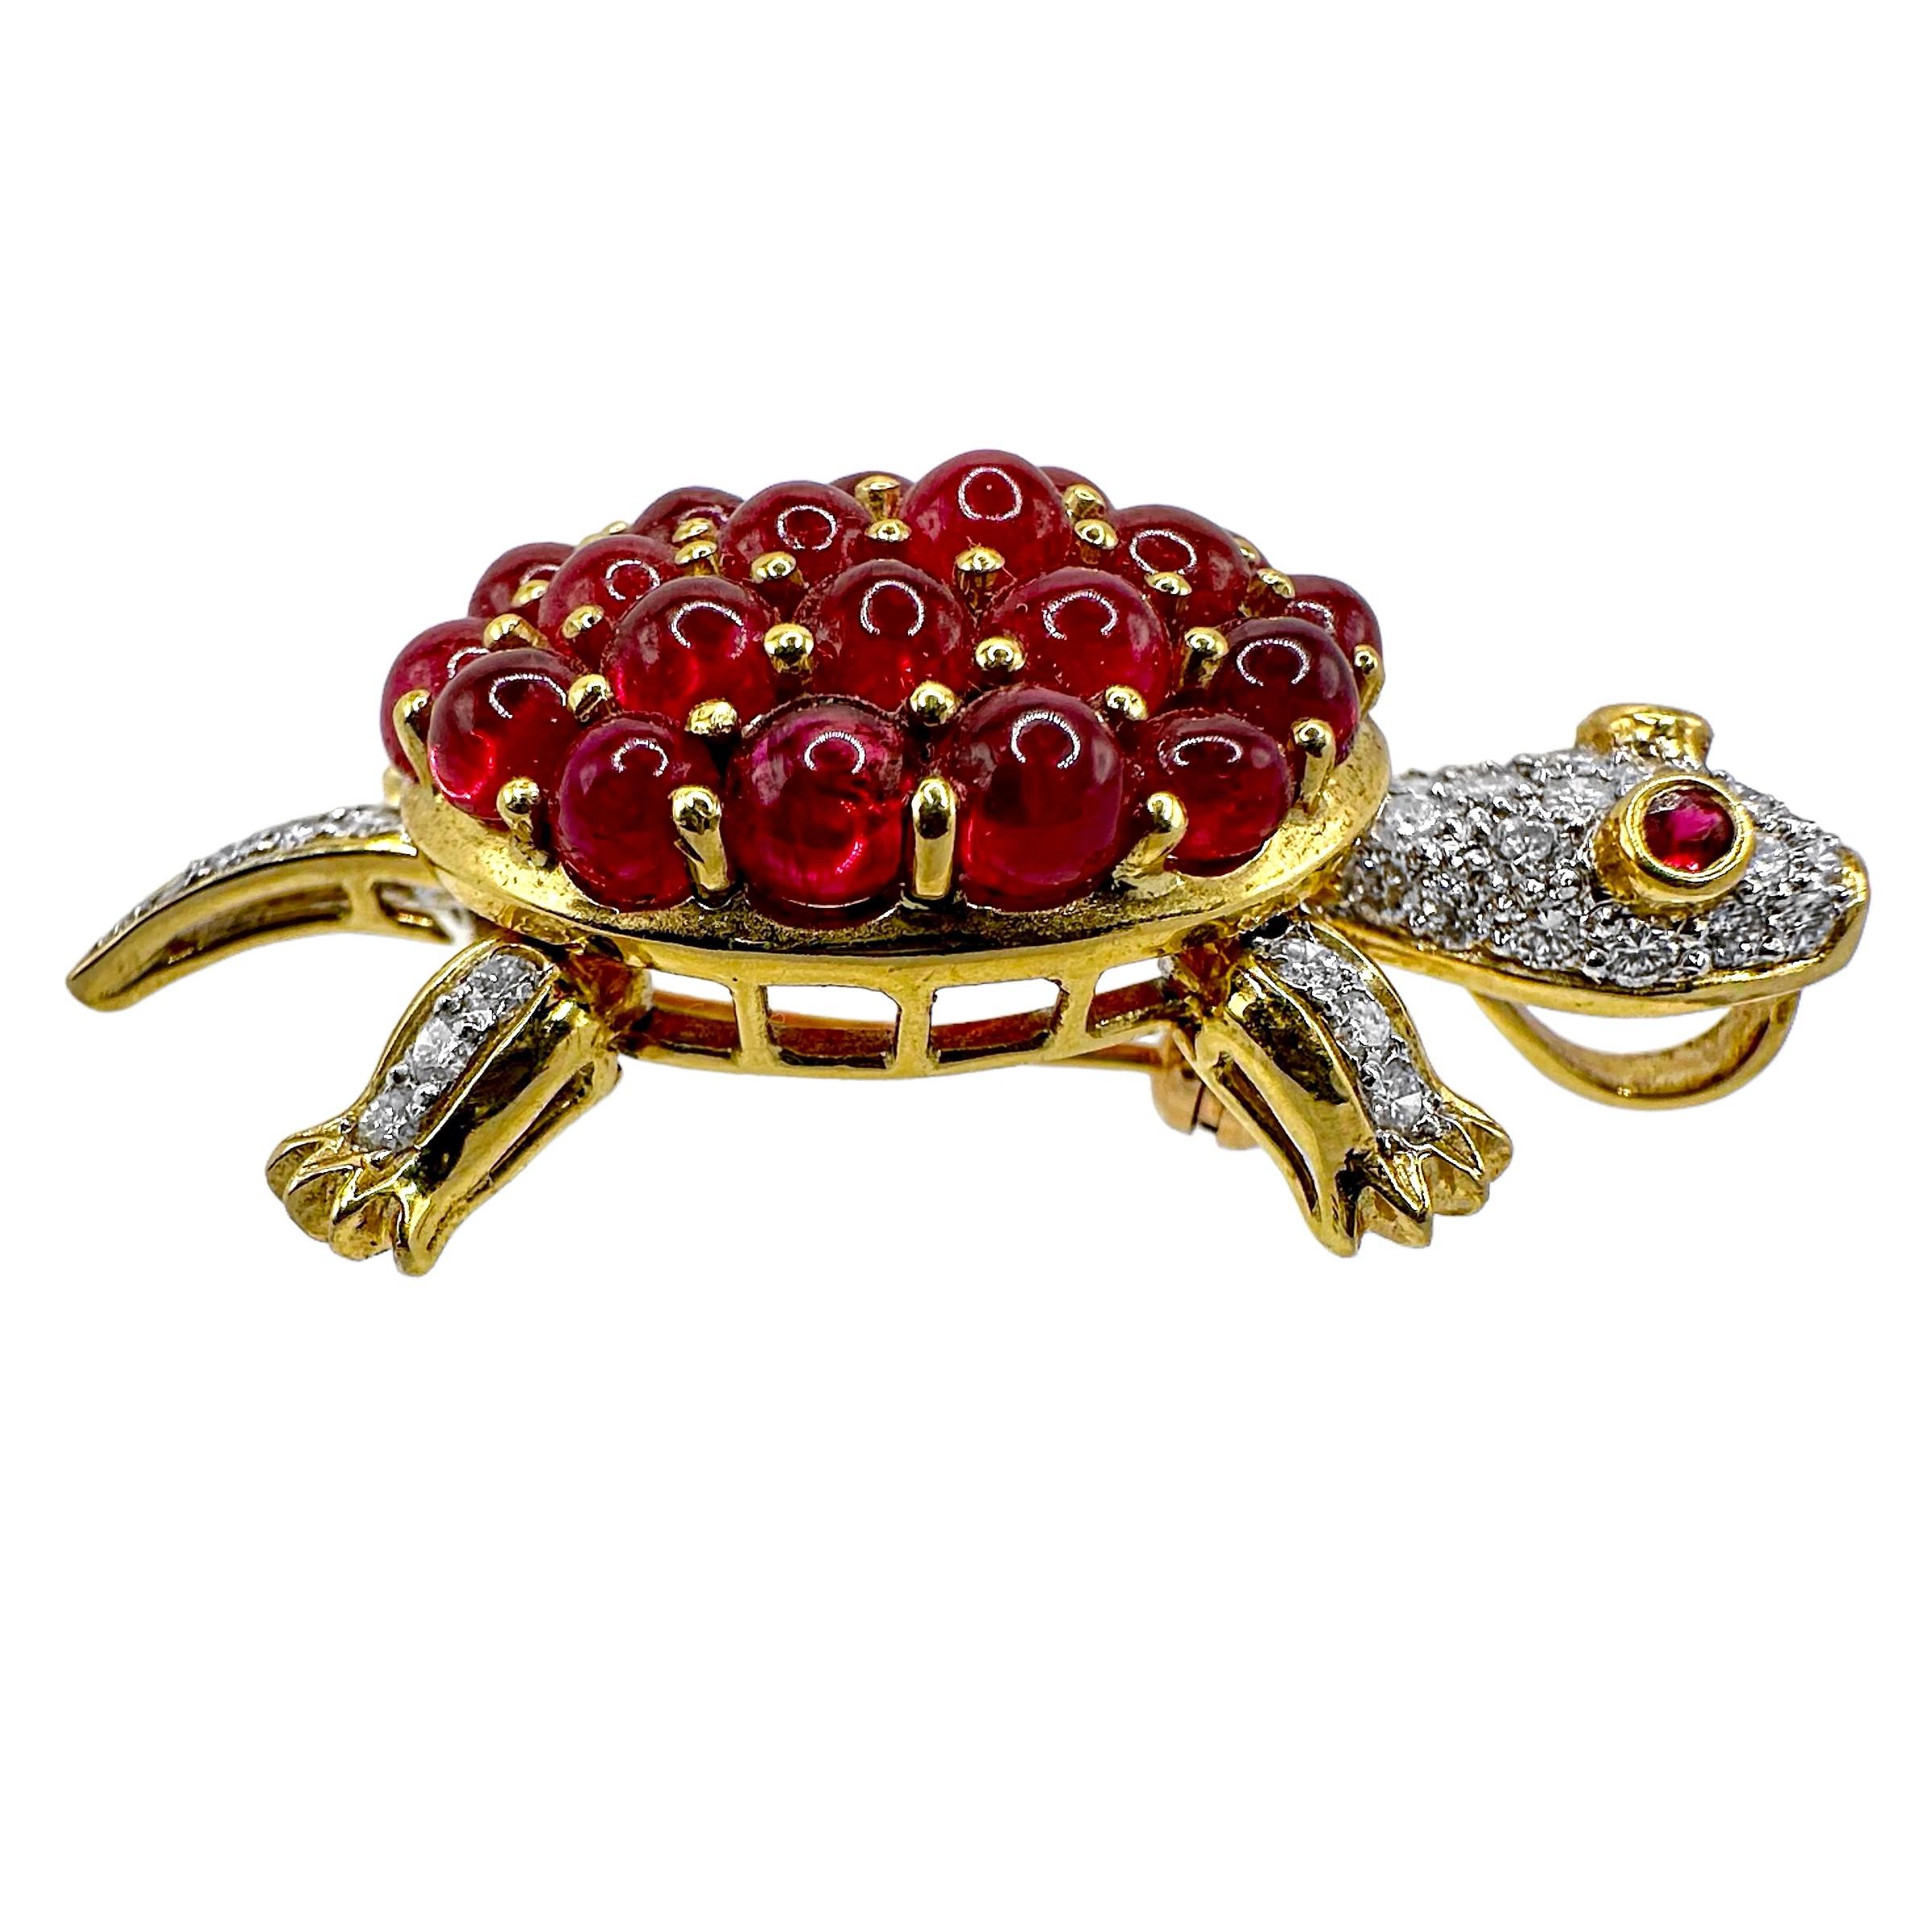 Adorable Turtle Brooch/Pendant with Motion in 18K Gold, Diamonds, and Rubies In Excellent Condition For Sale In Palm Beach, FL